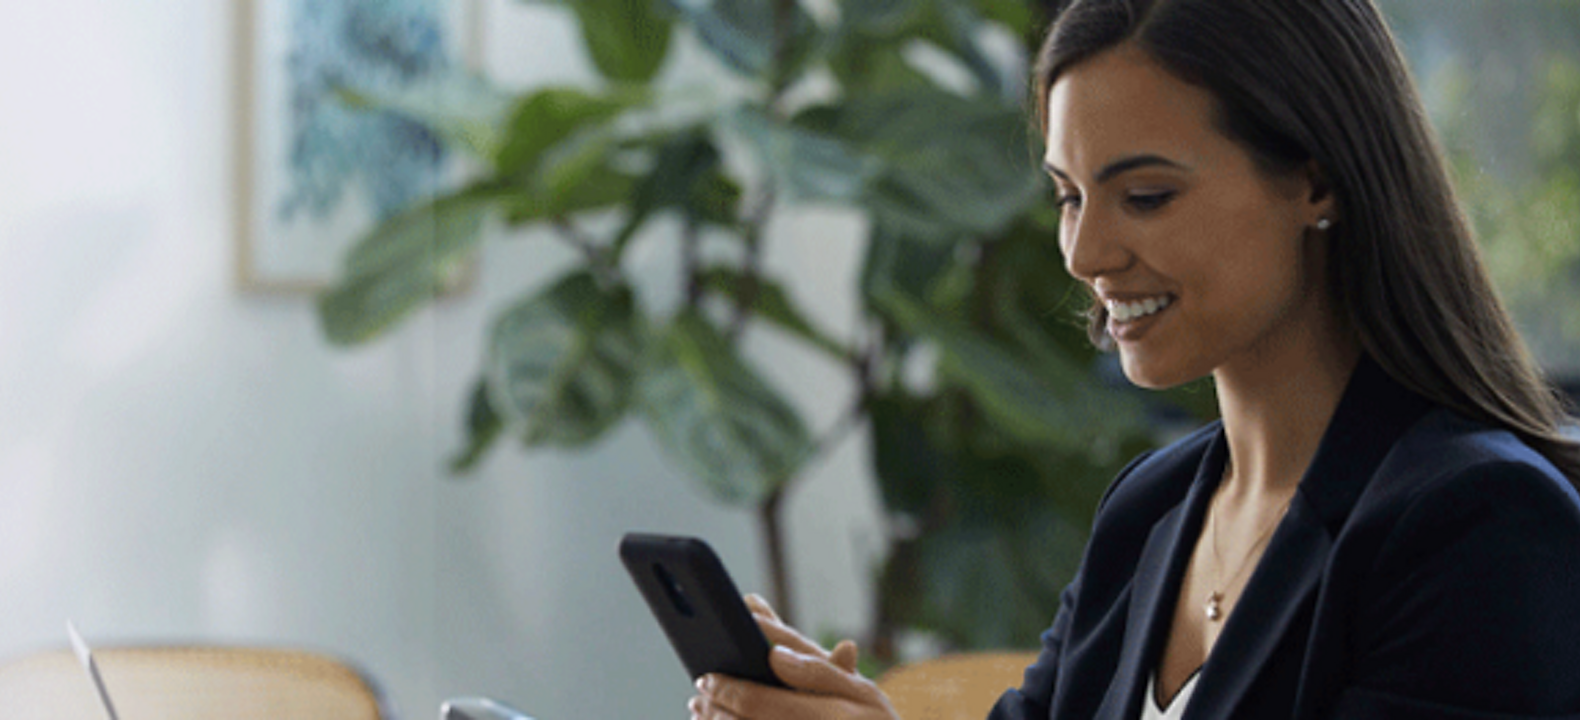 A smiling financial services professional uses her smartphone while seated in a conference room.